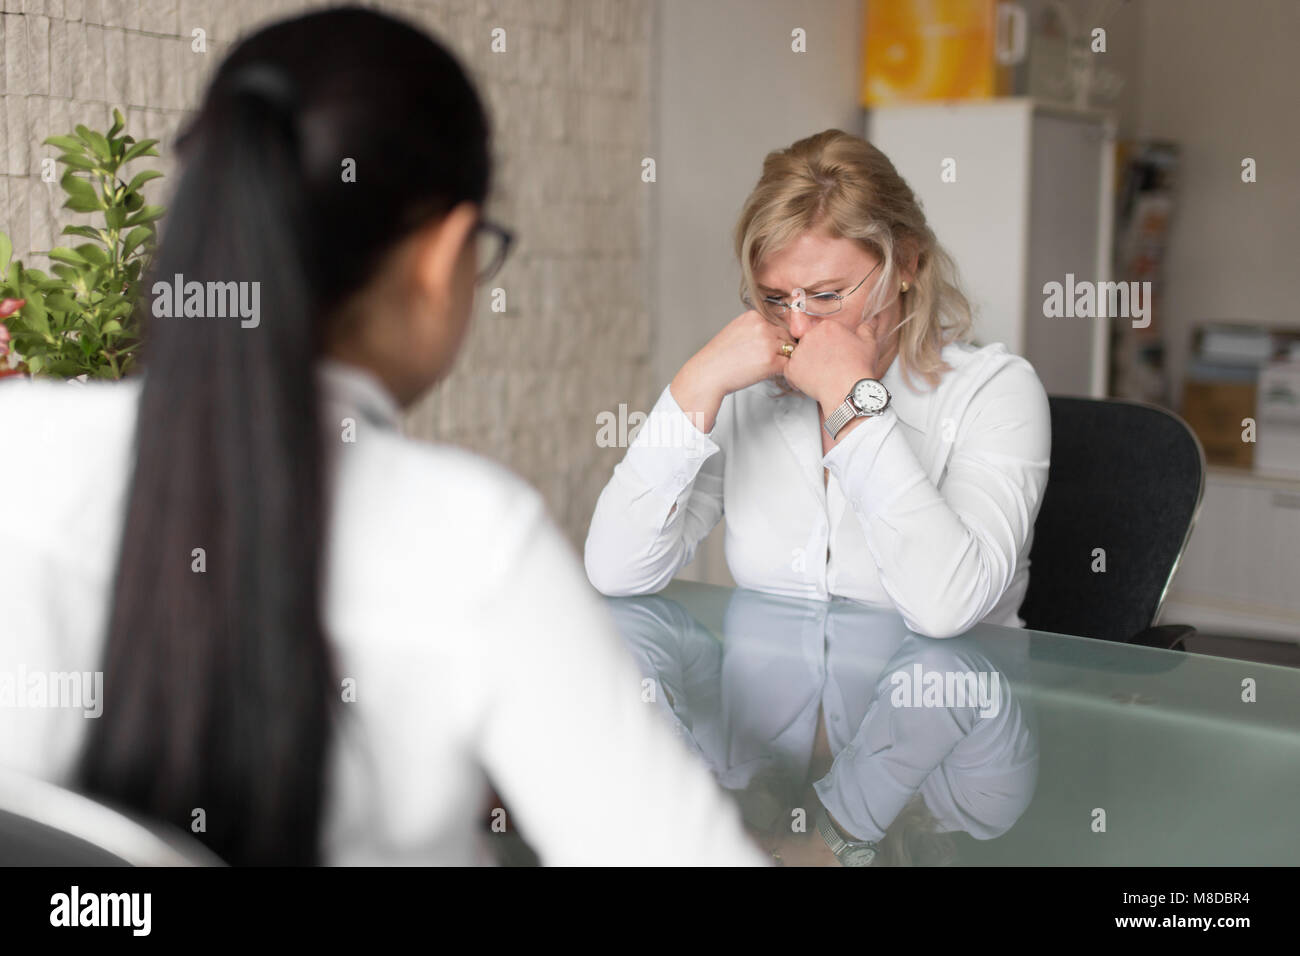 Sad blonde job applicant woman failure on interview in office Stock Photo